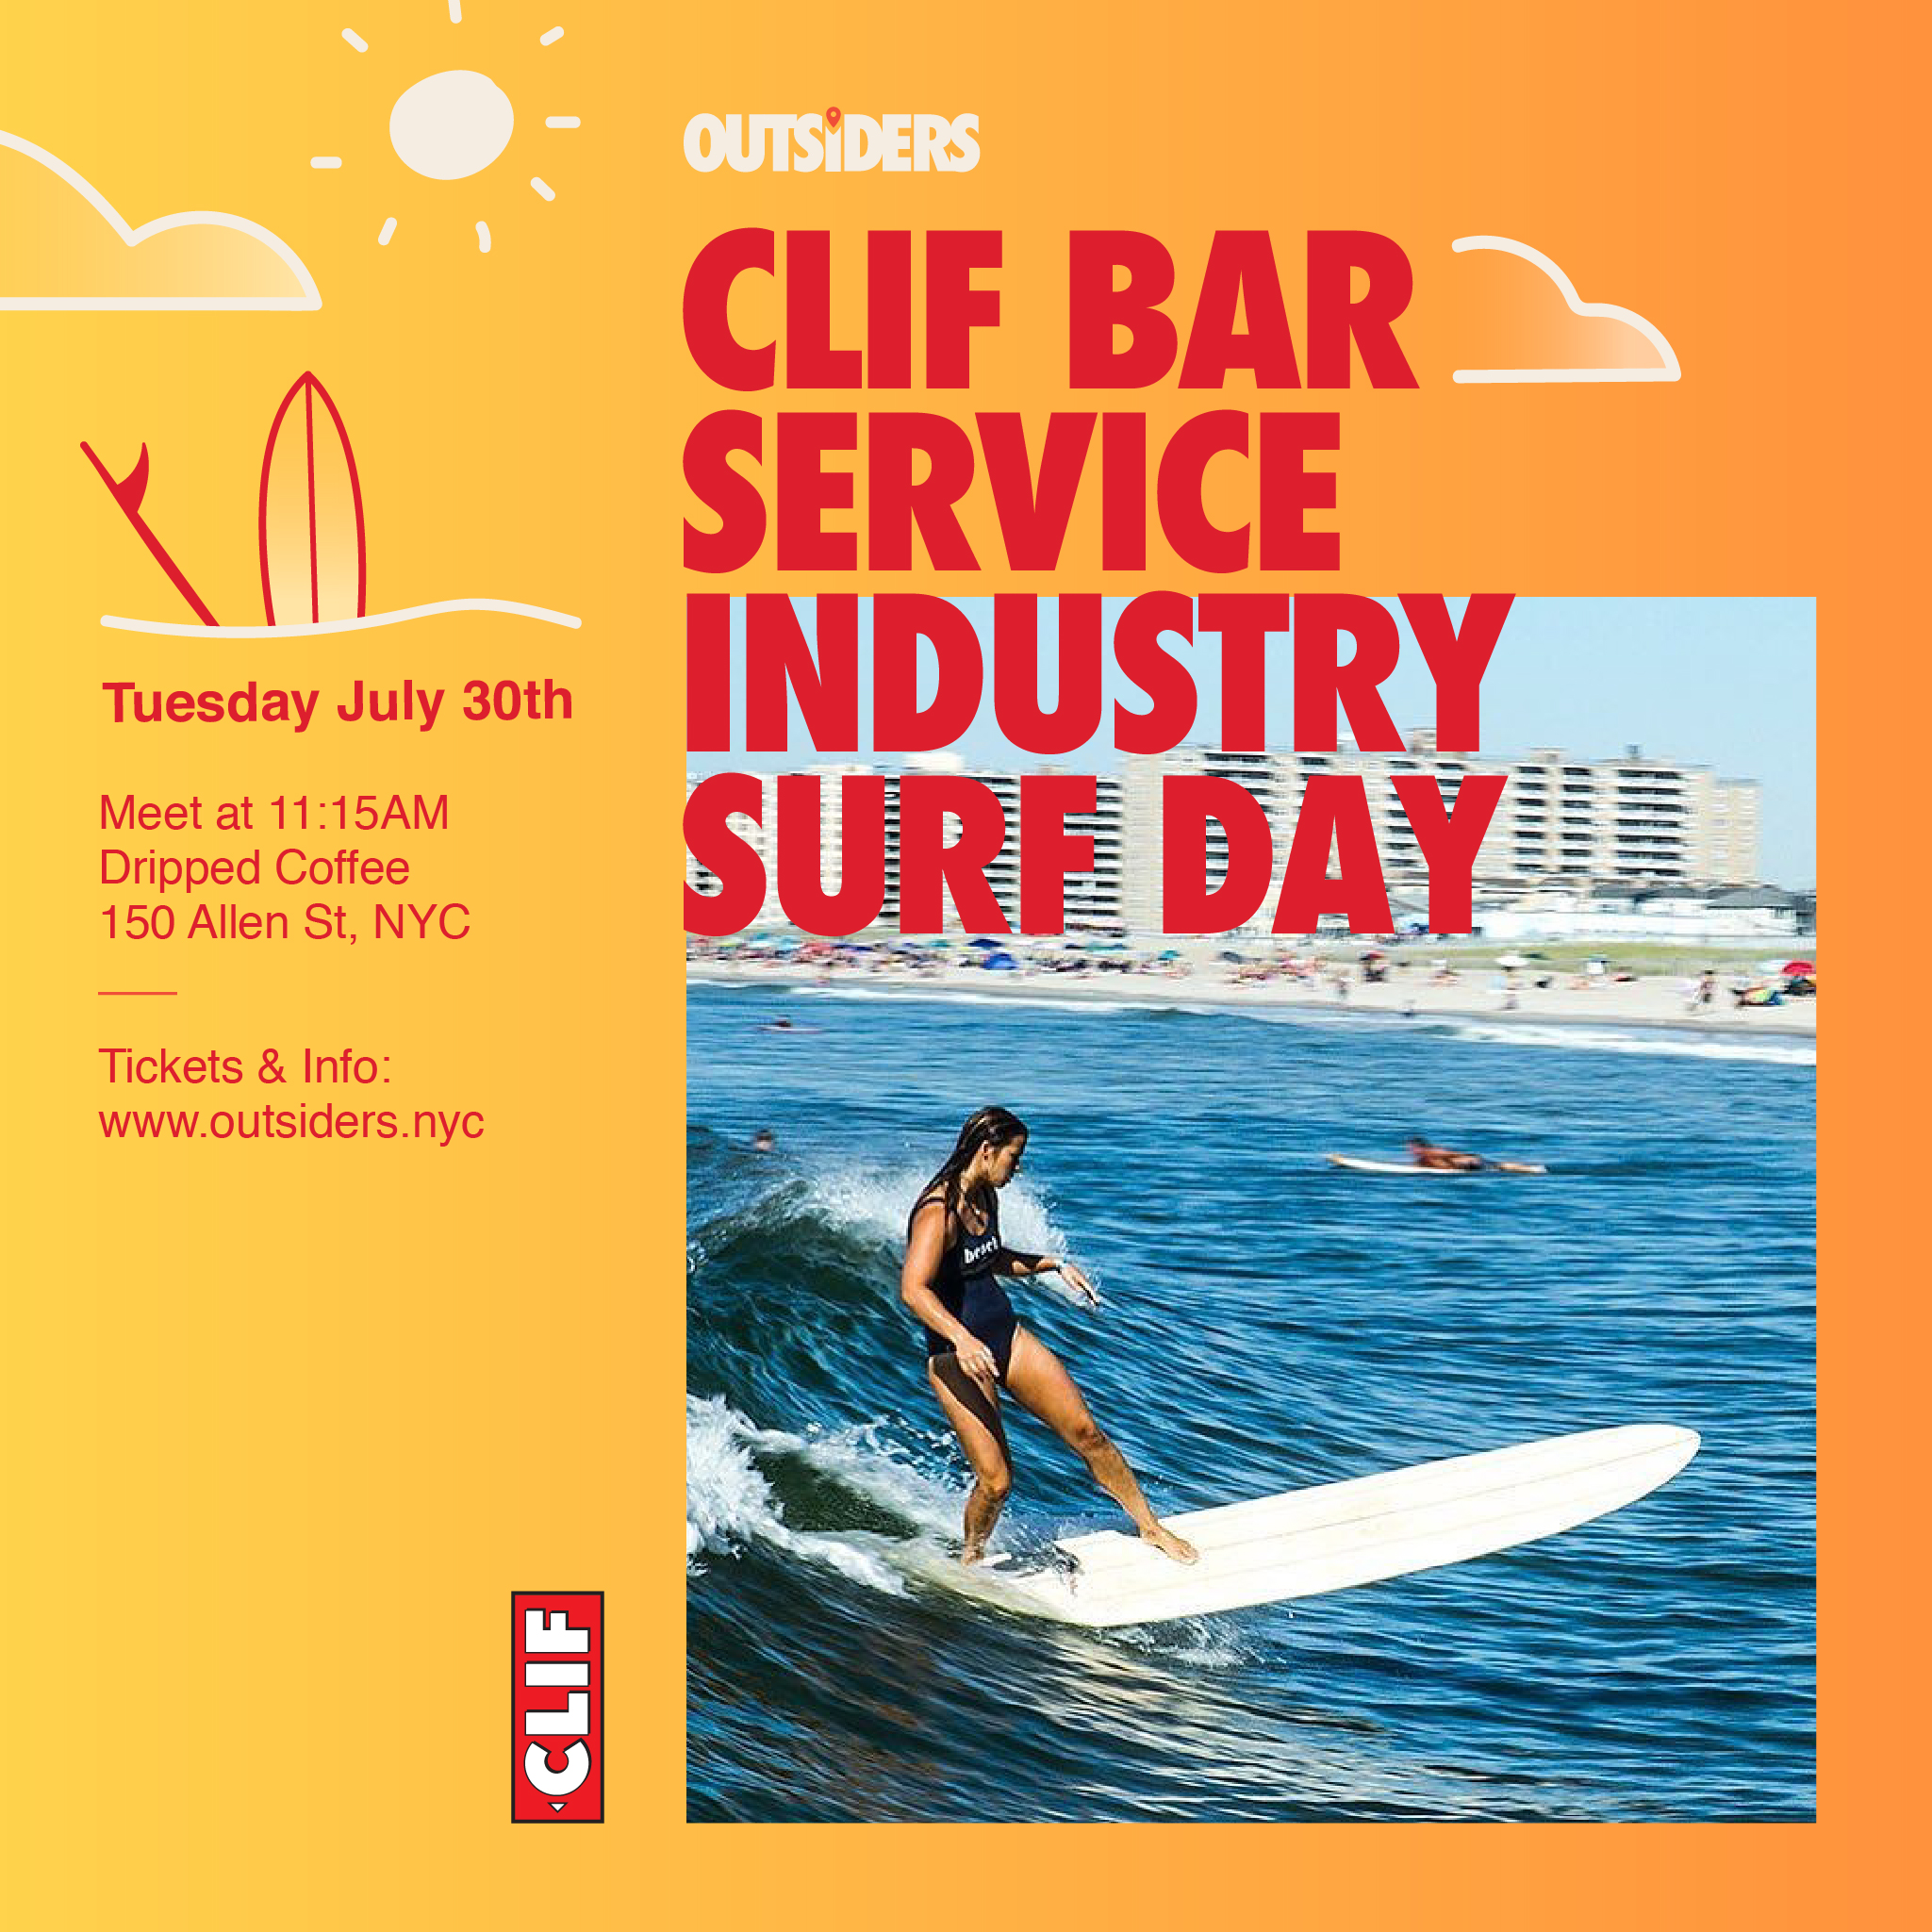 Clif Bar Service Industry Surf Day